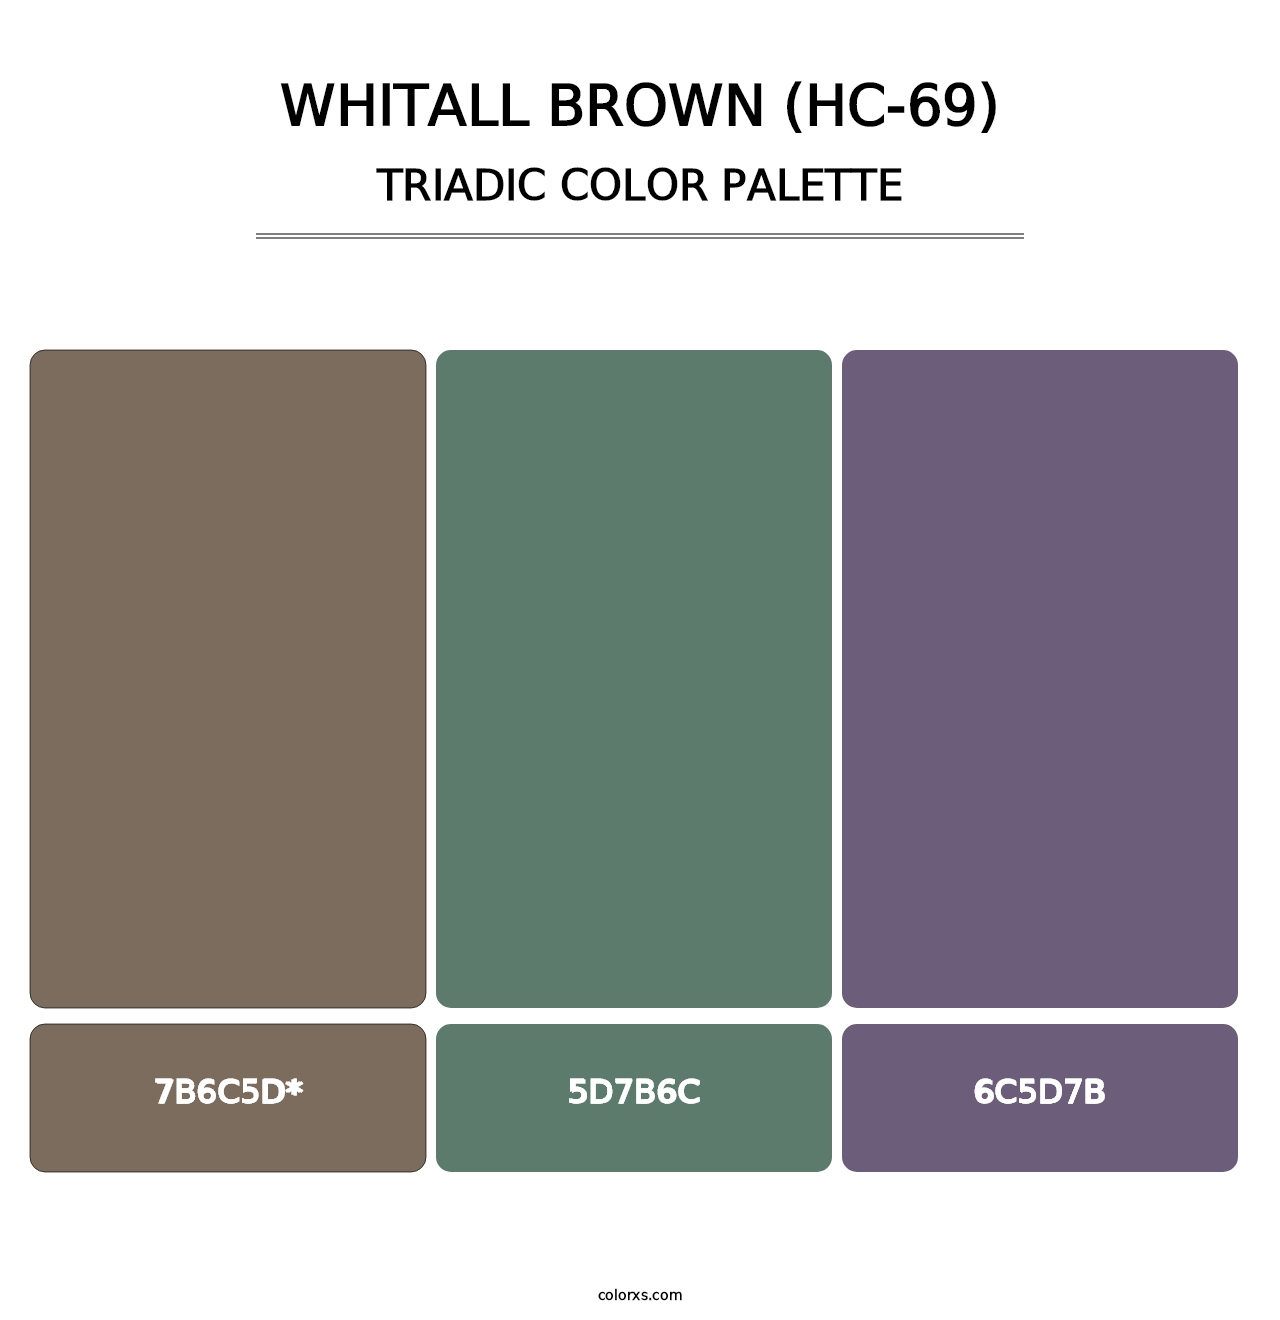 Whitall Brown (HC-69) - Triadic Color Palette